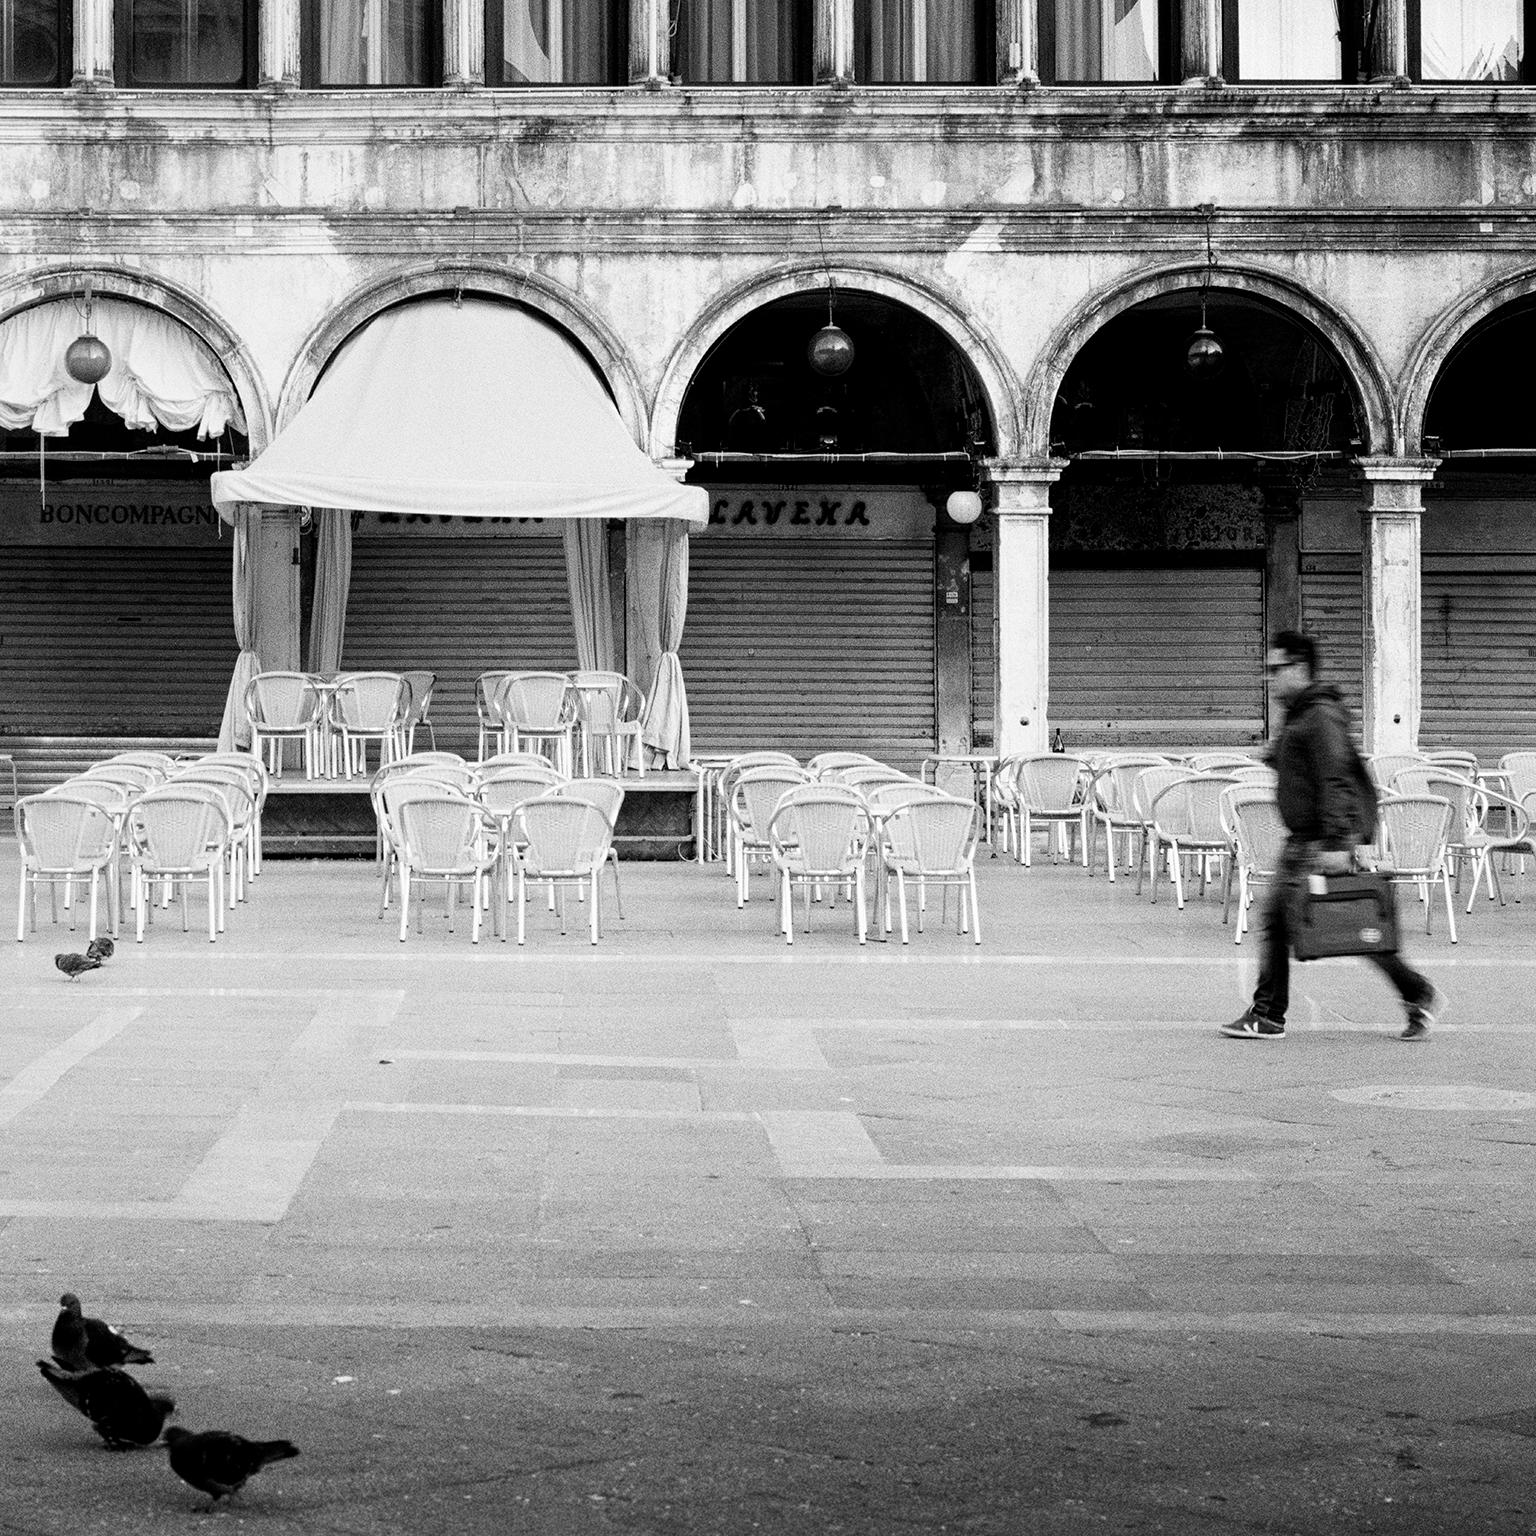 Caffe Florian, Venice - Black and White fine art cityscape film photography - Photograph by Gerald Berghammer